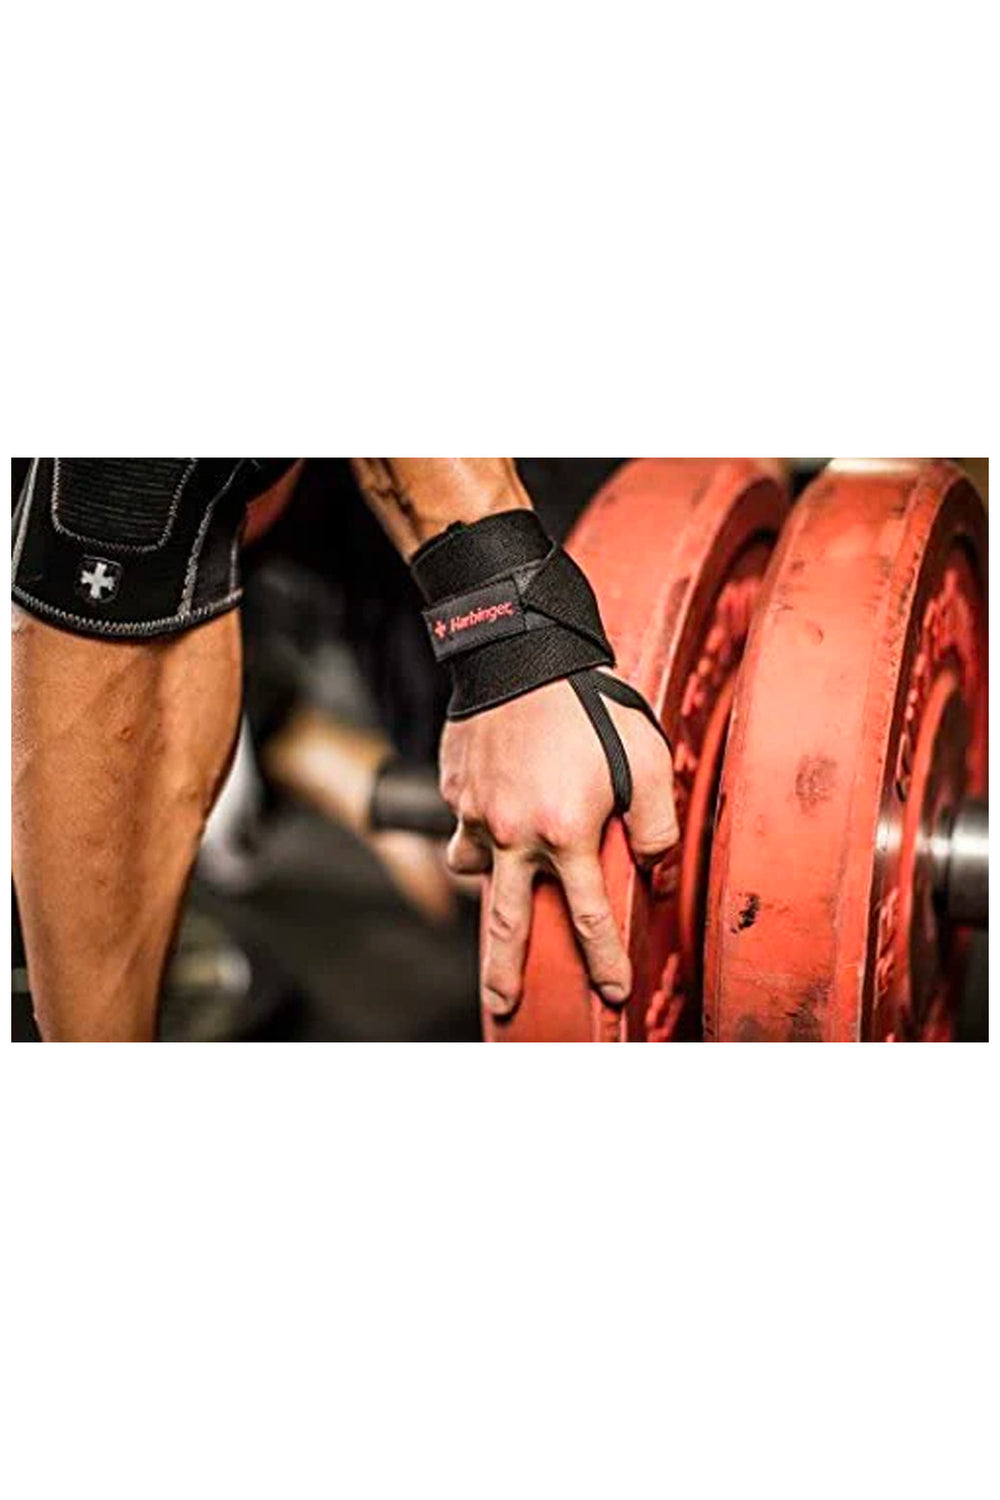 Harbinger Pro Thumb Loop Wrist Wraps, wrapped on a male hand